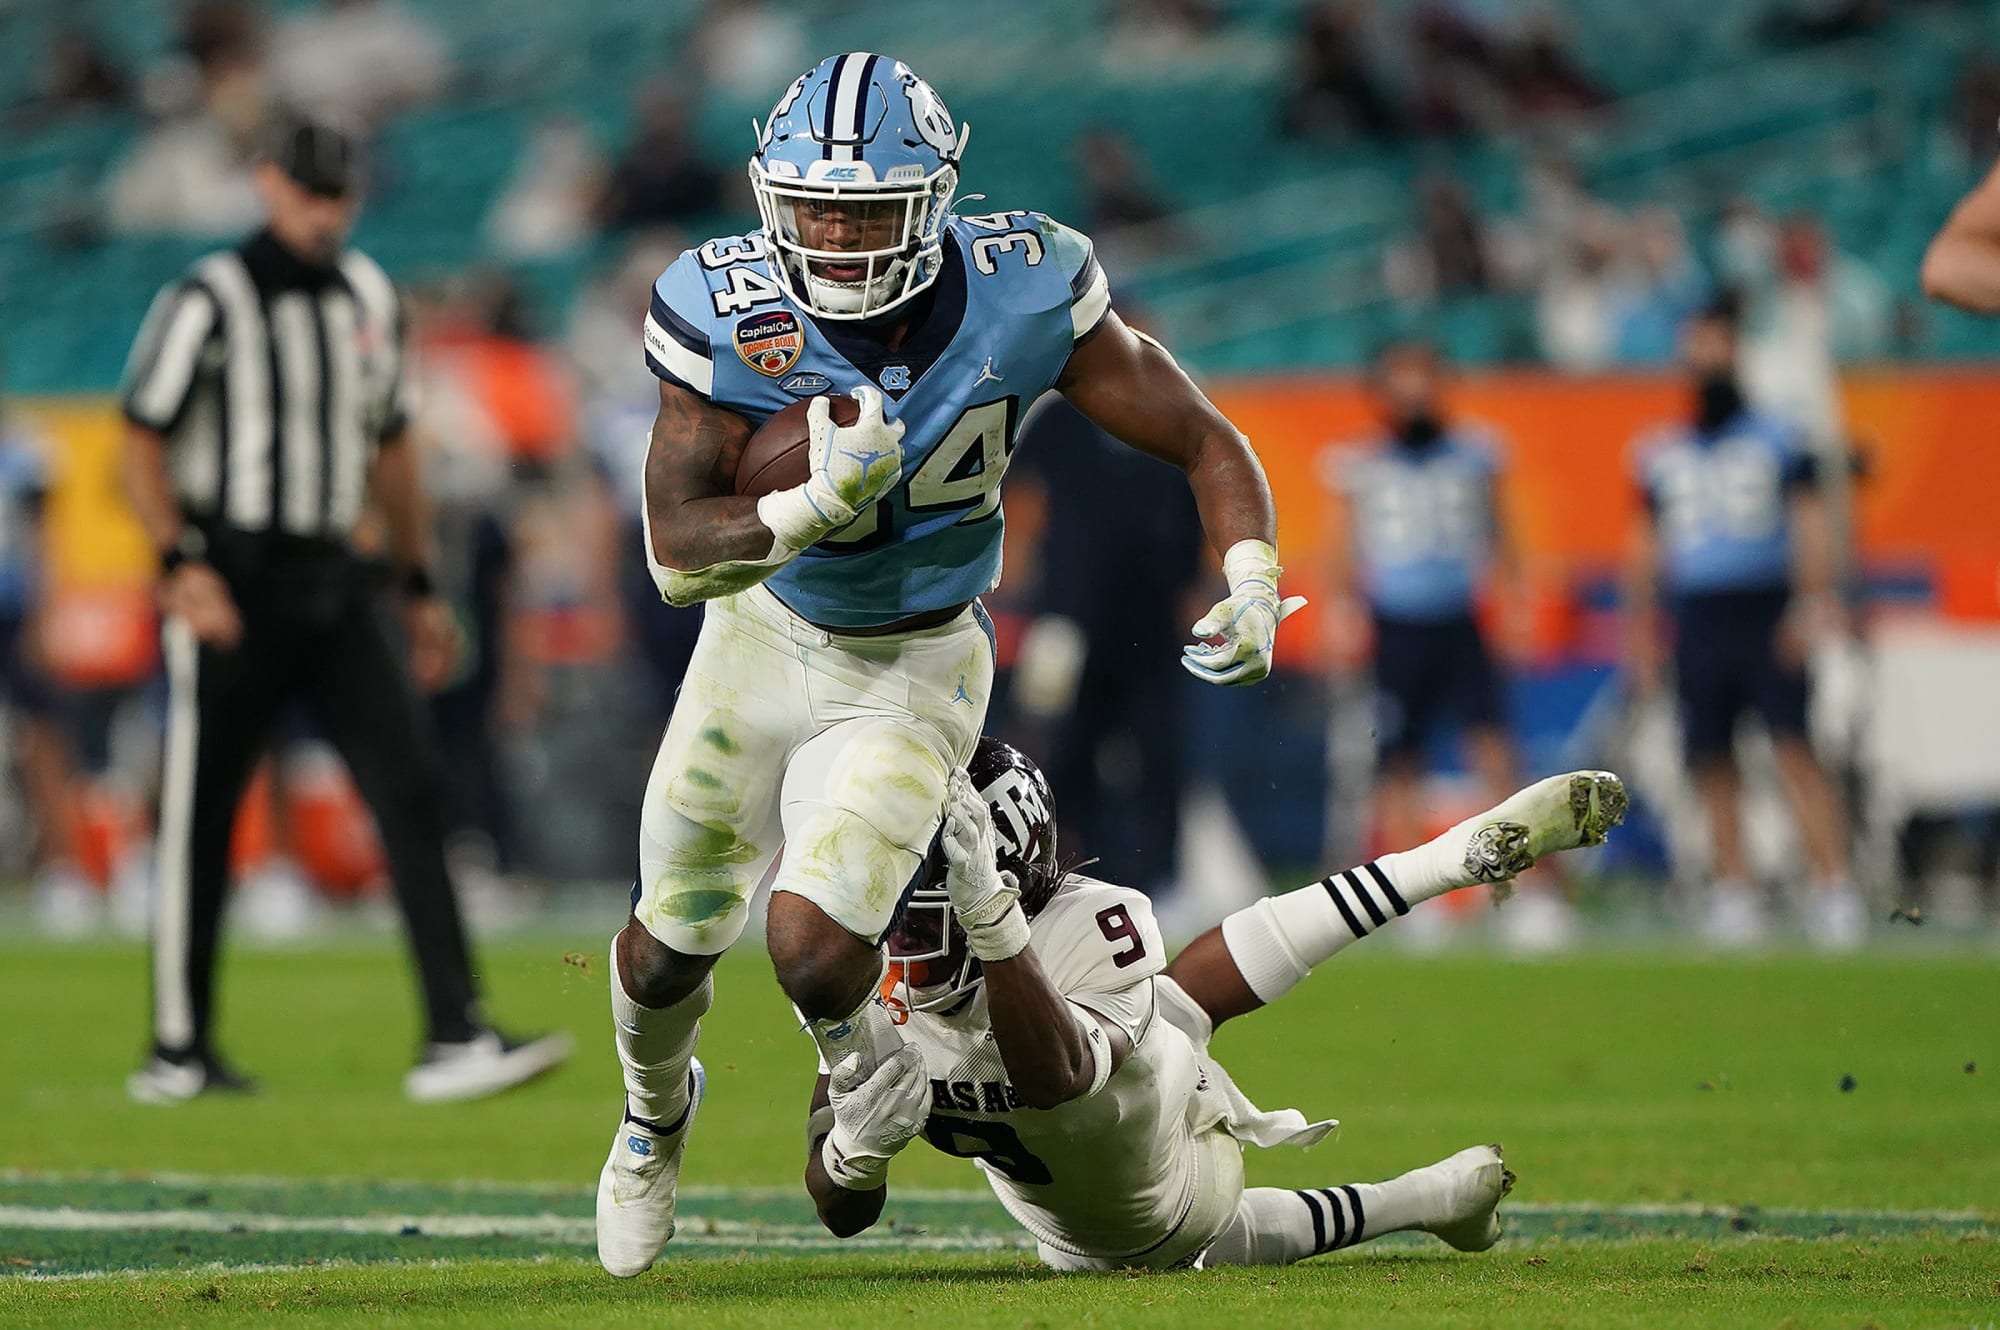 UNC Football: British Brooks ruled out for 2022 season